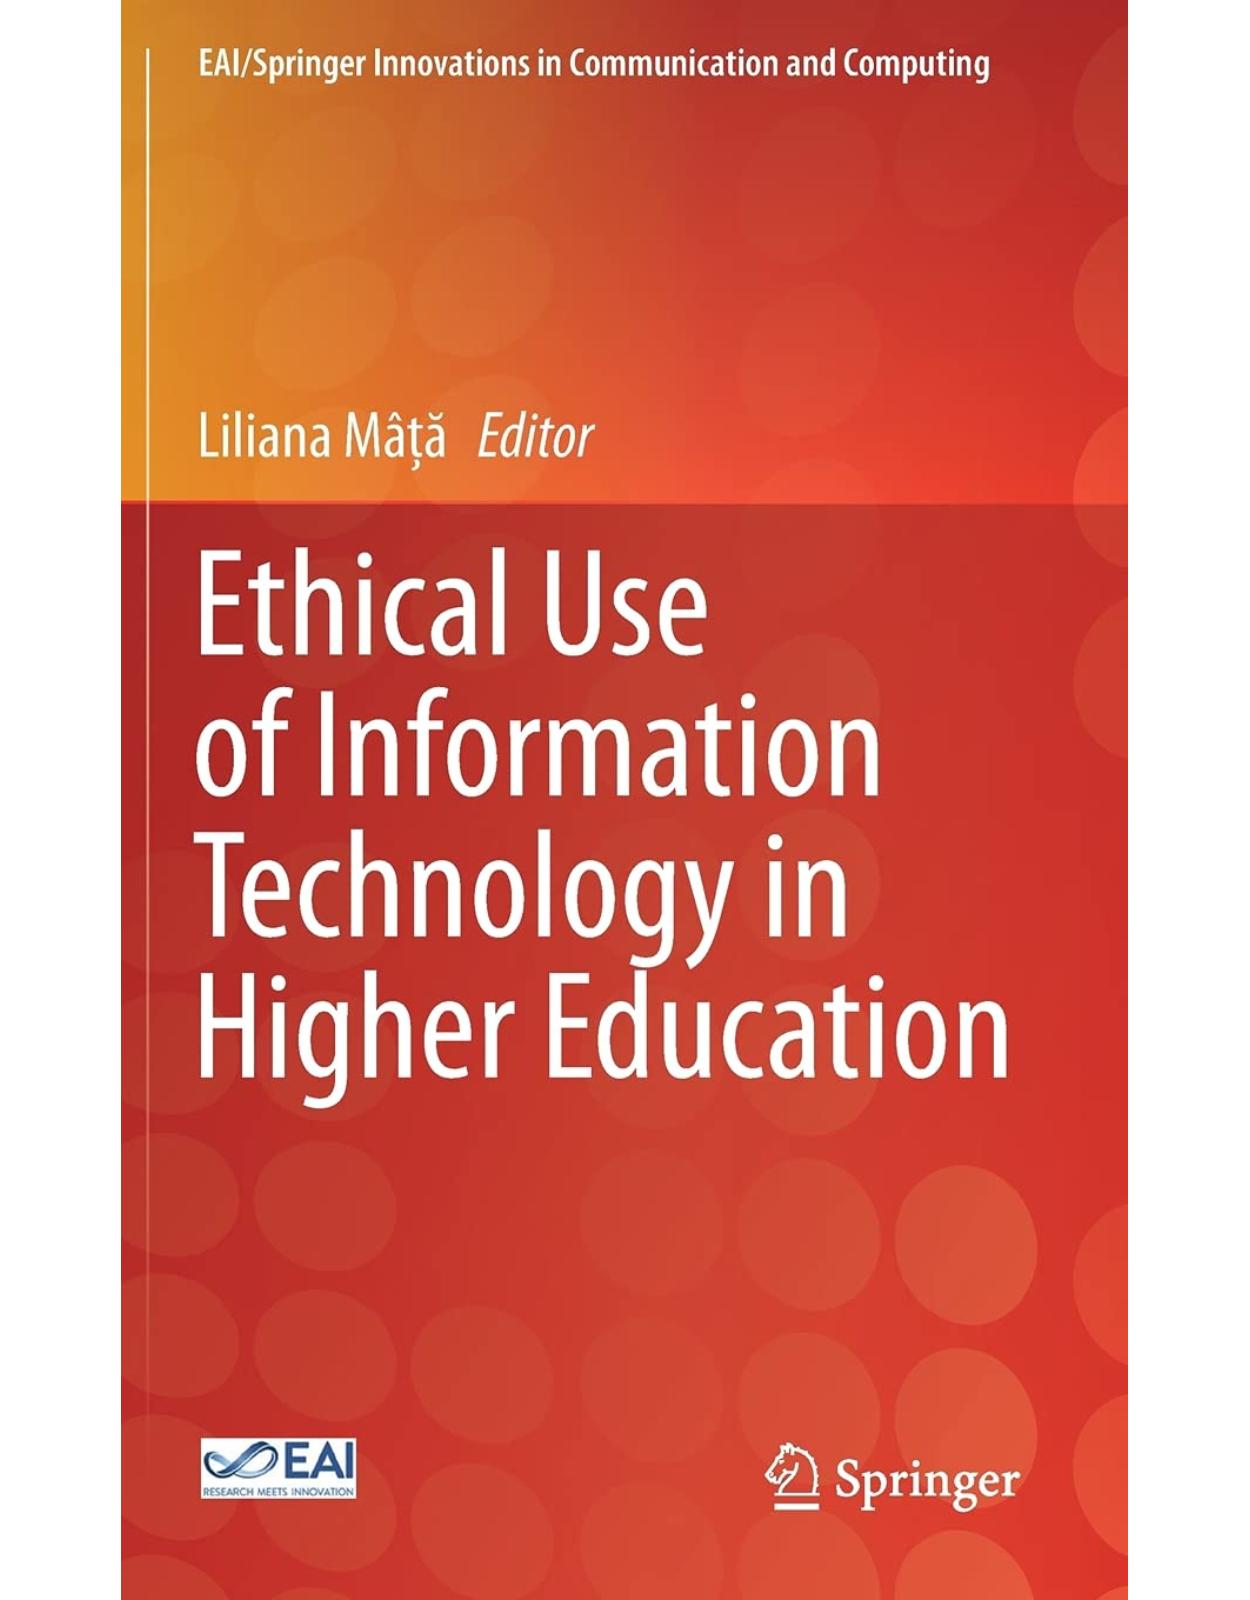 Ethical Use of Information Technology in Higher Education